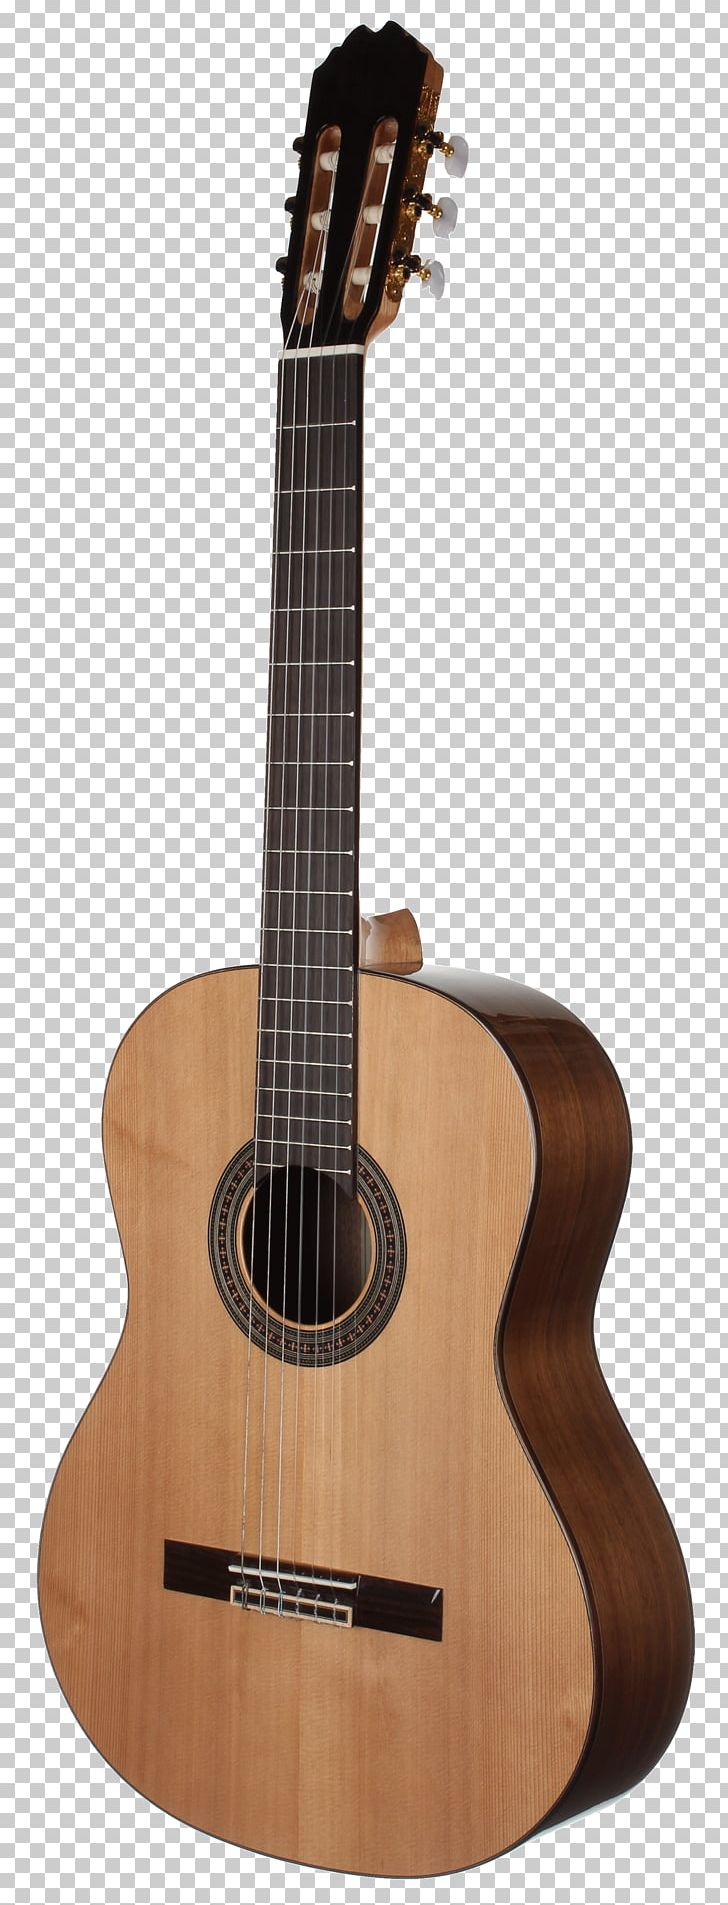 Classical Guitar Acoustic Guitar Musical Instruments String Instruments PNG, Clipart, Classical Guitar, Cuatro, Distortion, Guitar Accessory, Musical Instrument Free PNG Download